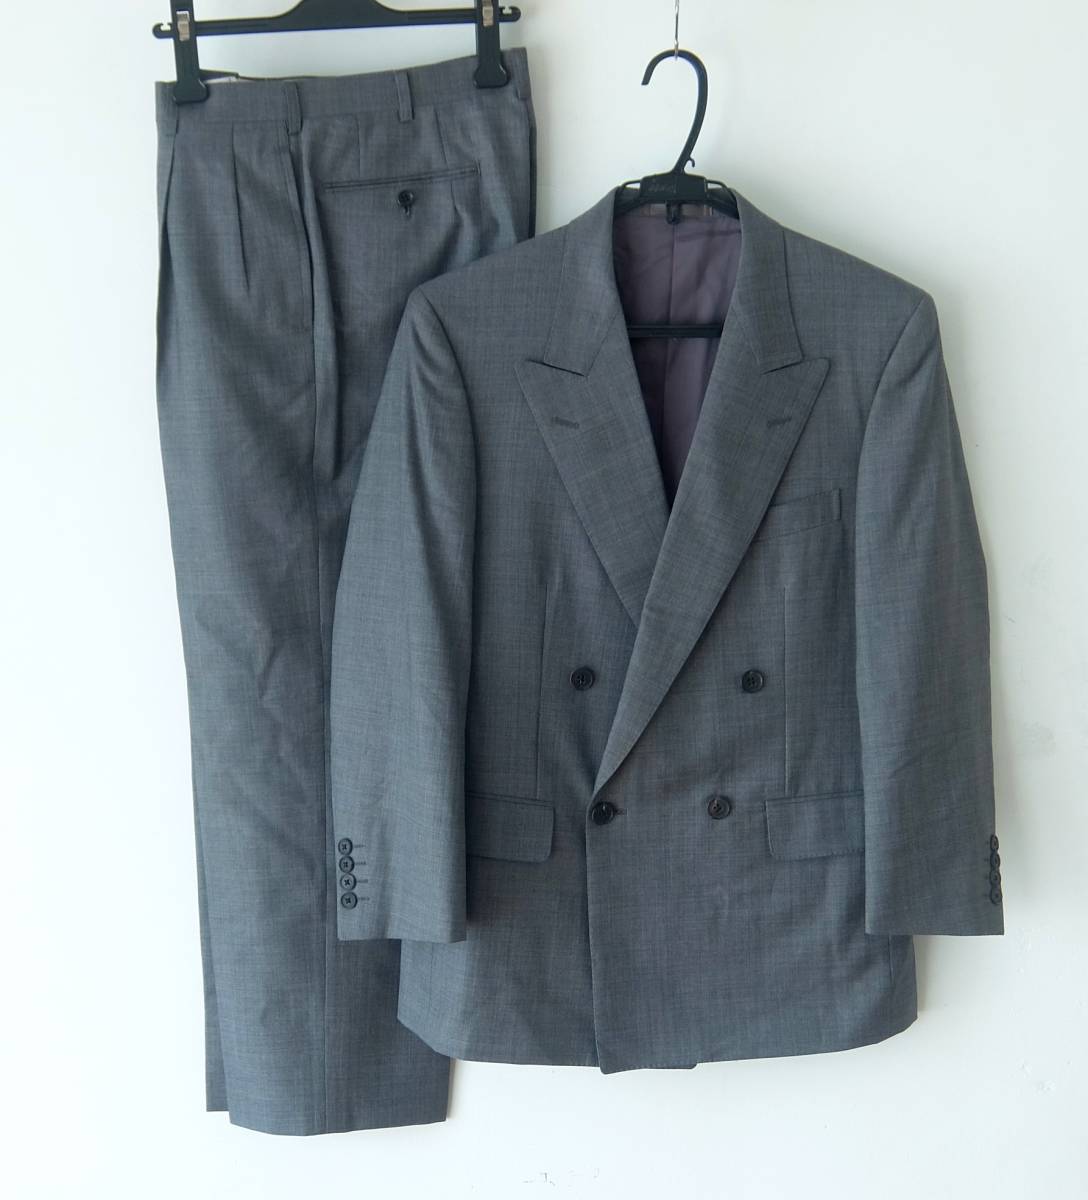 Aquascutum Aquascutum double-breasted suit setup top and bottom set prompt decision equipped!